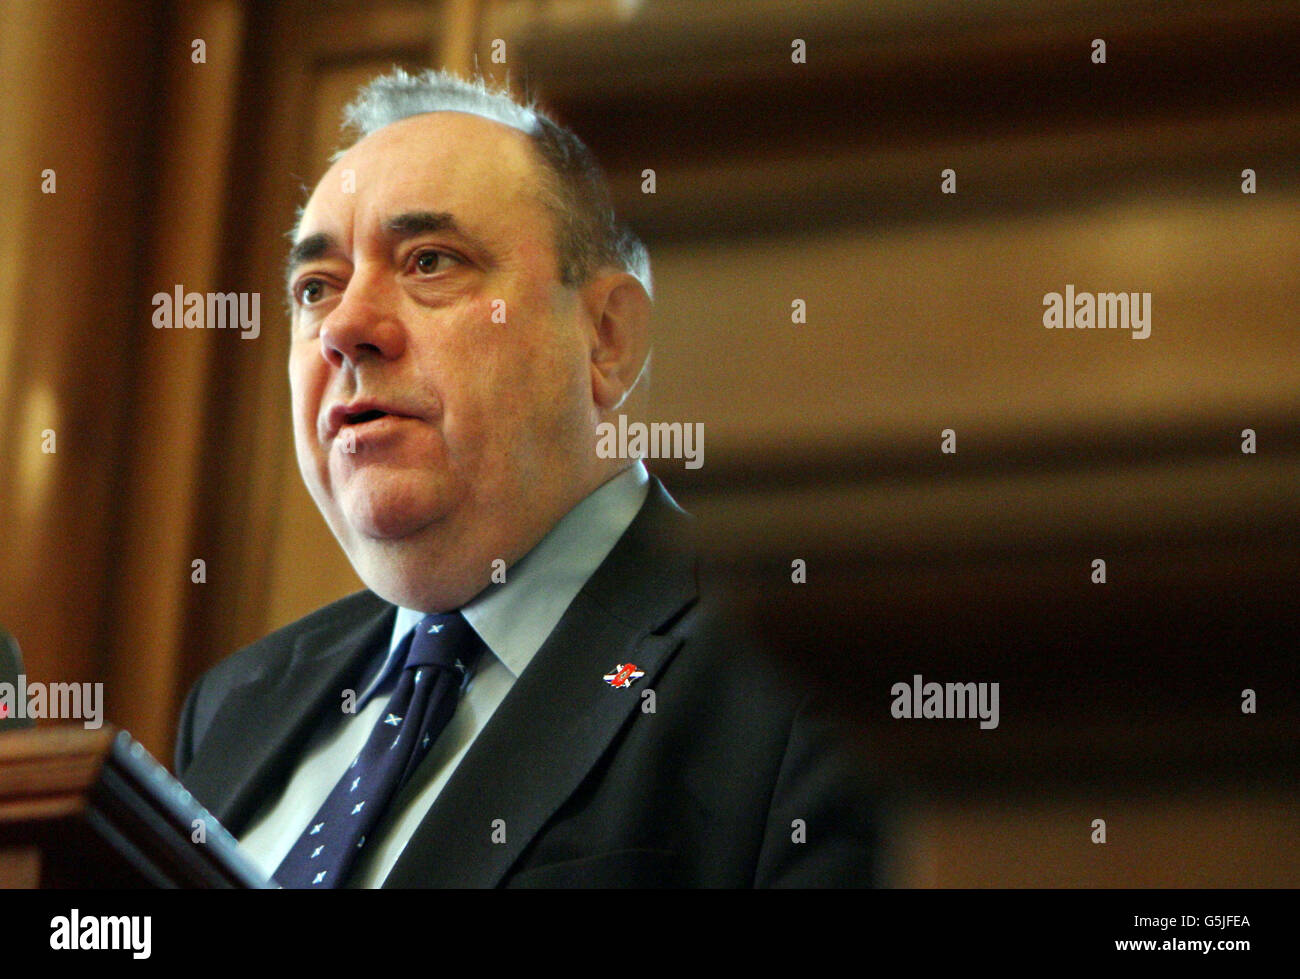 Scottish First Minster Alex Salmond speaks at a church of Scotland conference in Edinburgh on the 2,002 day since he took office. Salmond has become Scotland's longest-serving First Minister. Stock Photo